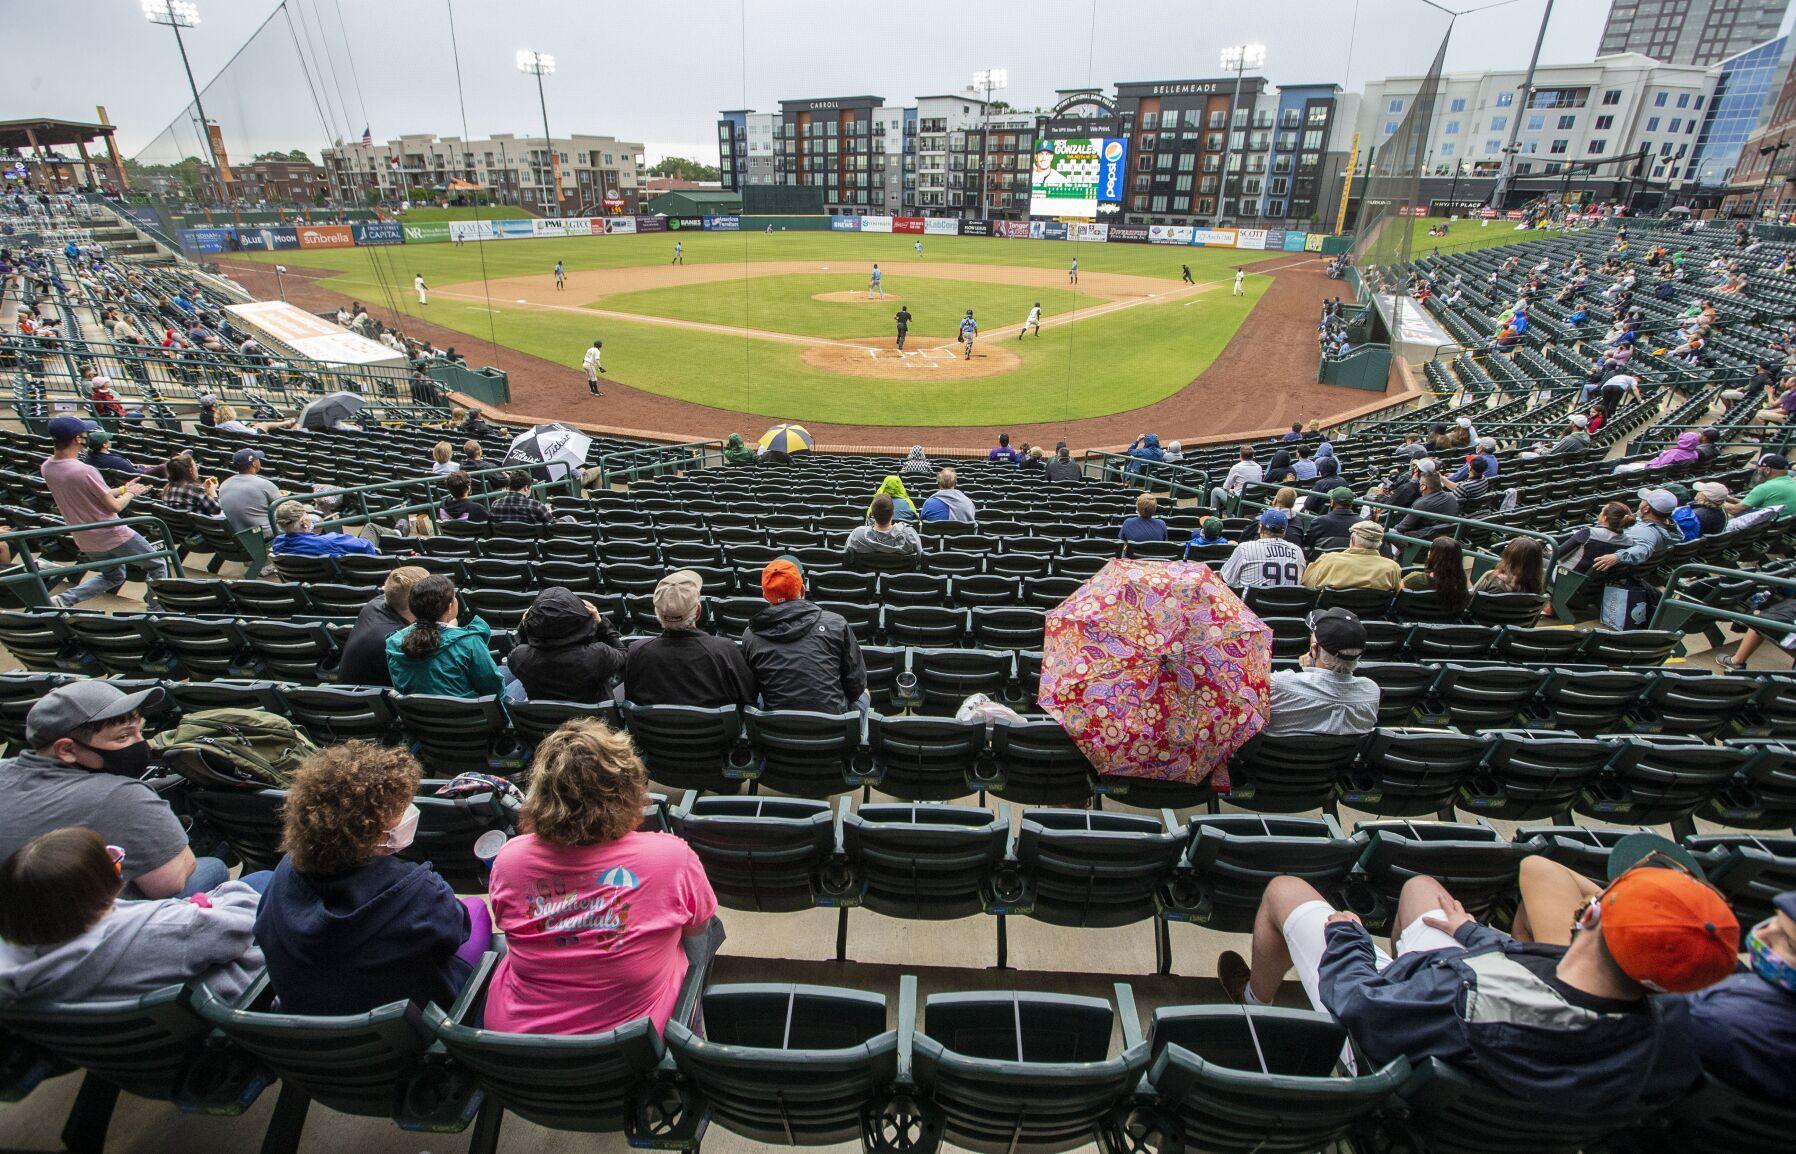 Photos: Opening night at the Greensboro Grasshoppers